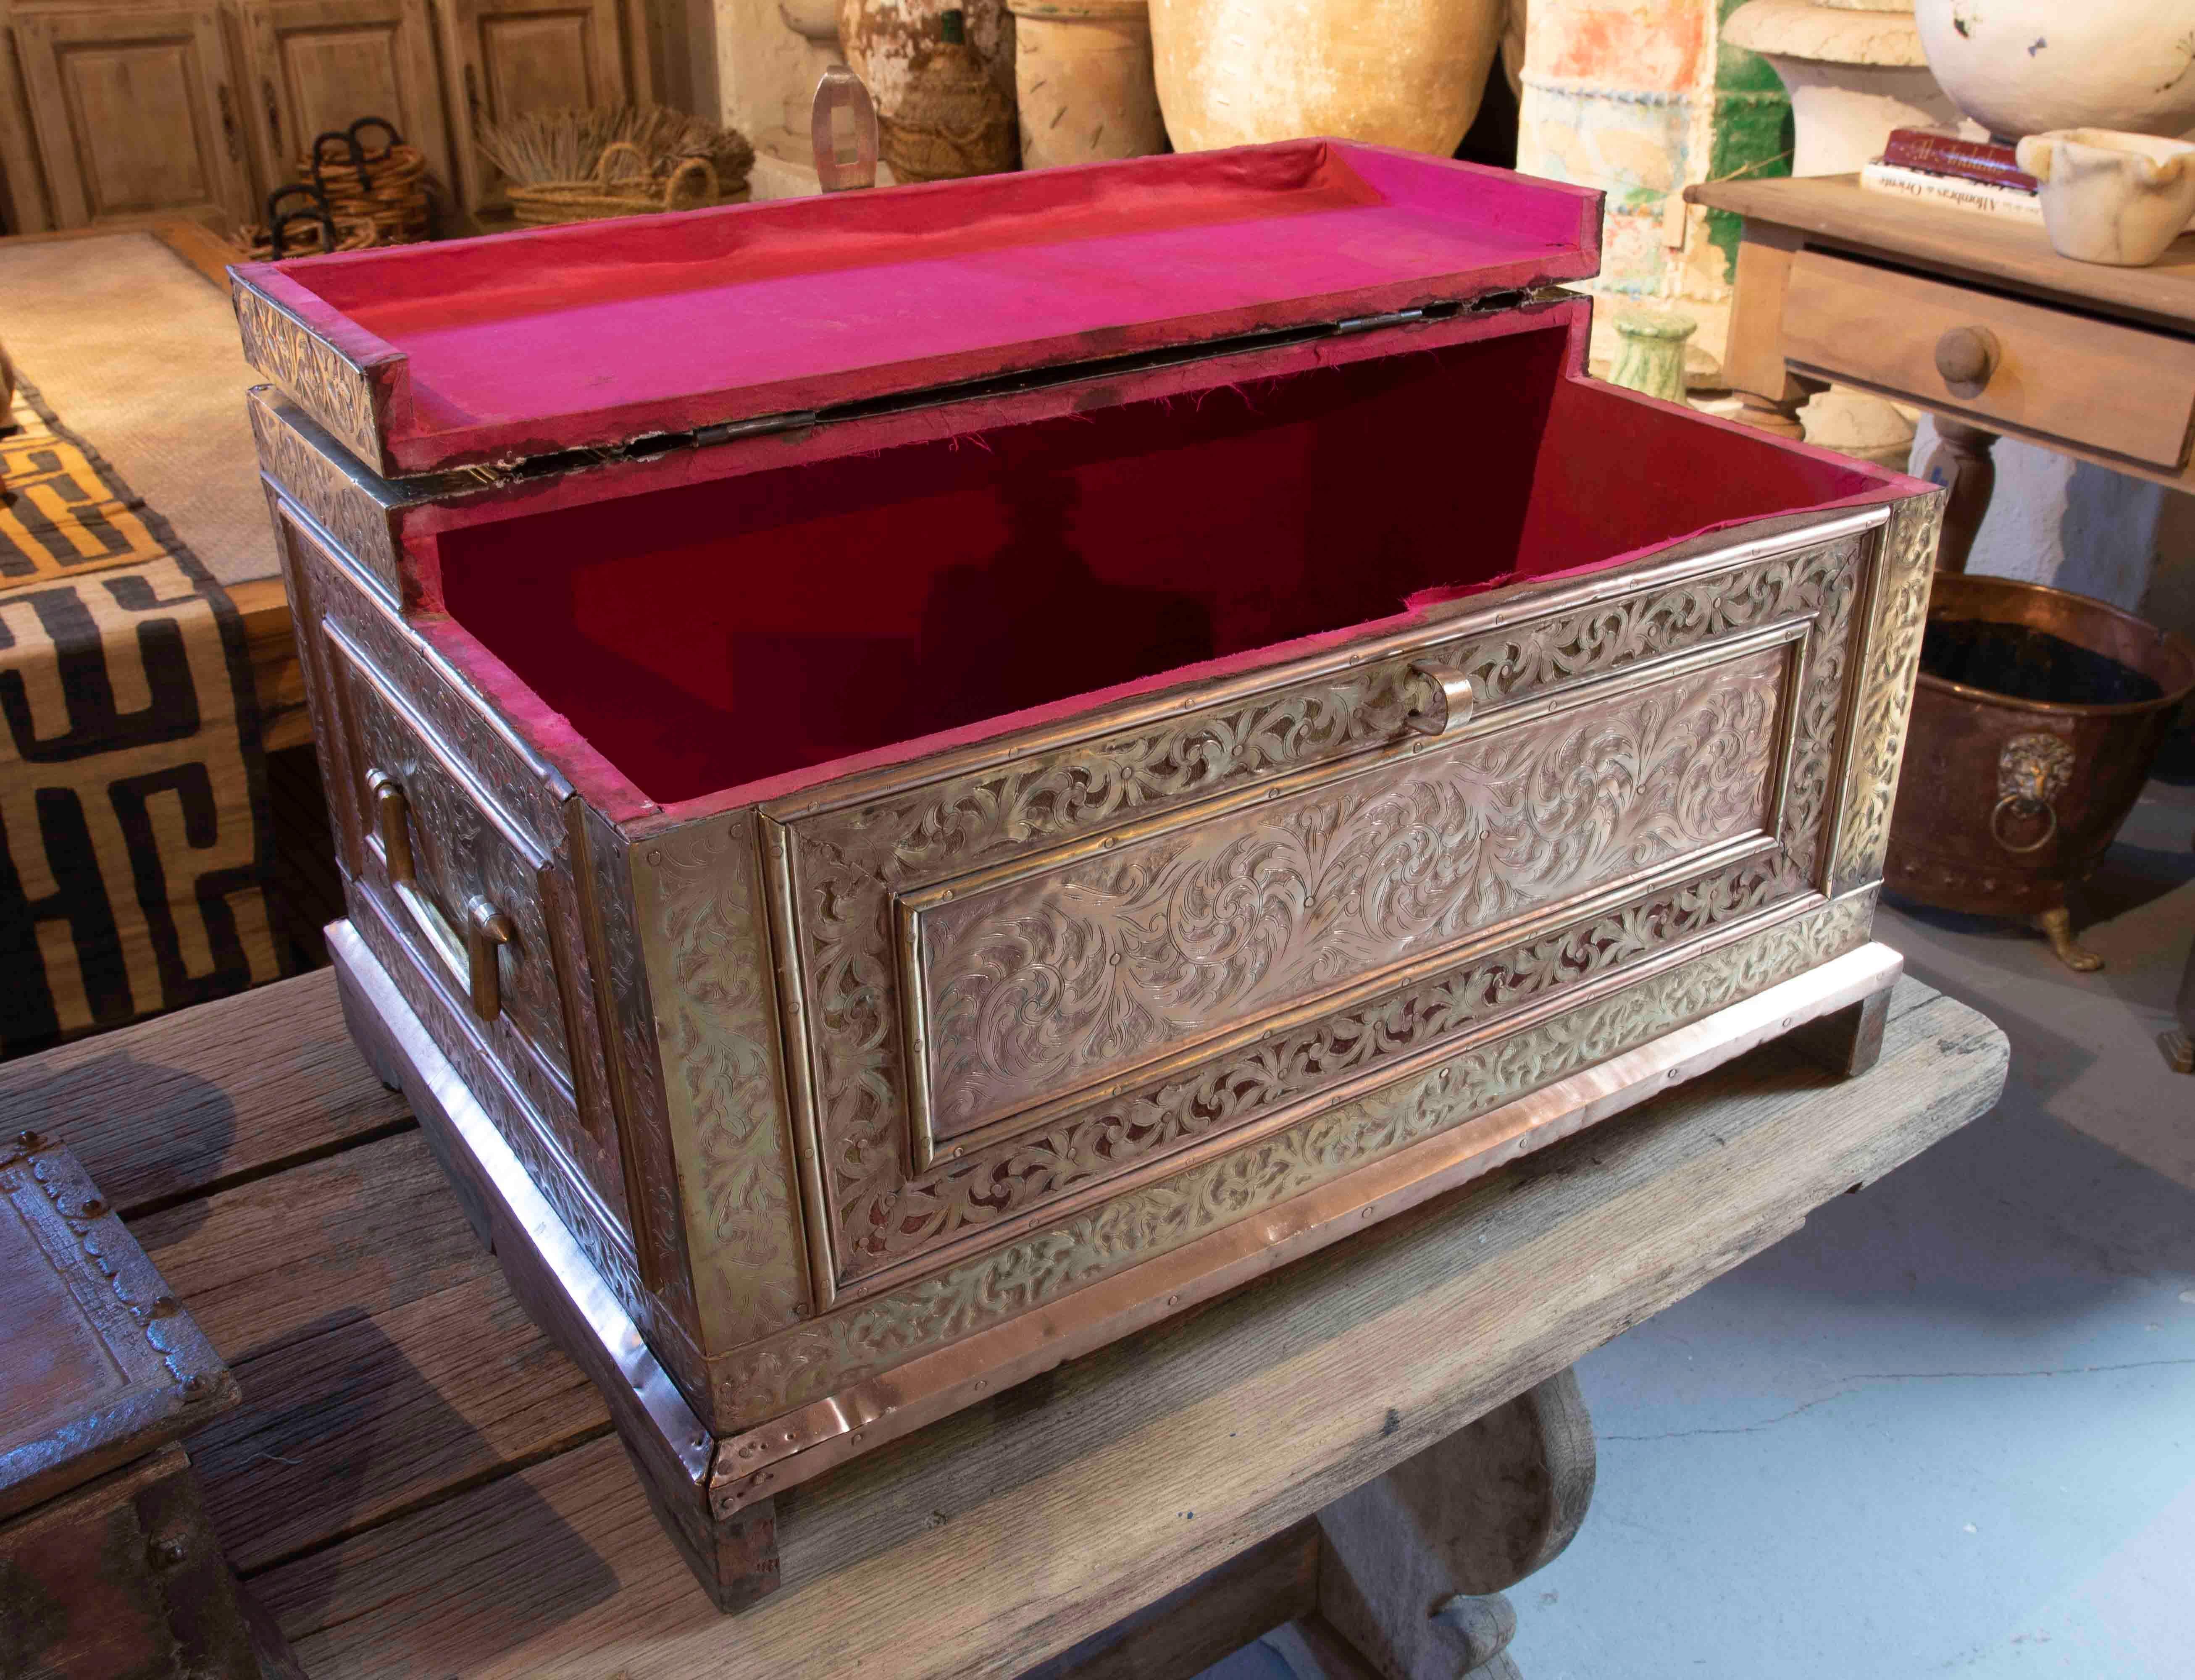 19th Century Indian Chest with Wooden Frame Covered in Embossed Brass with Handles